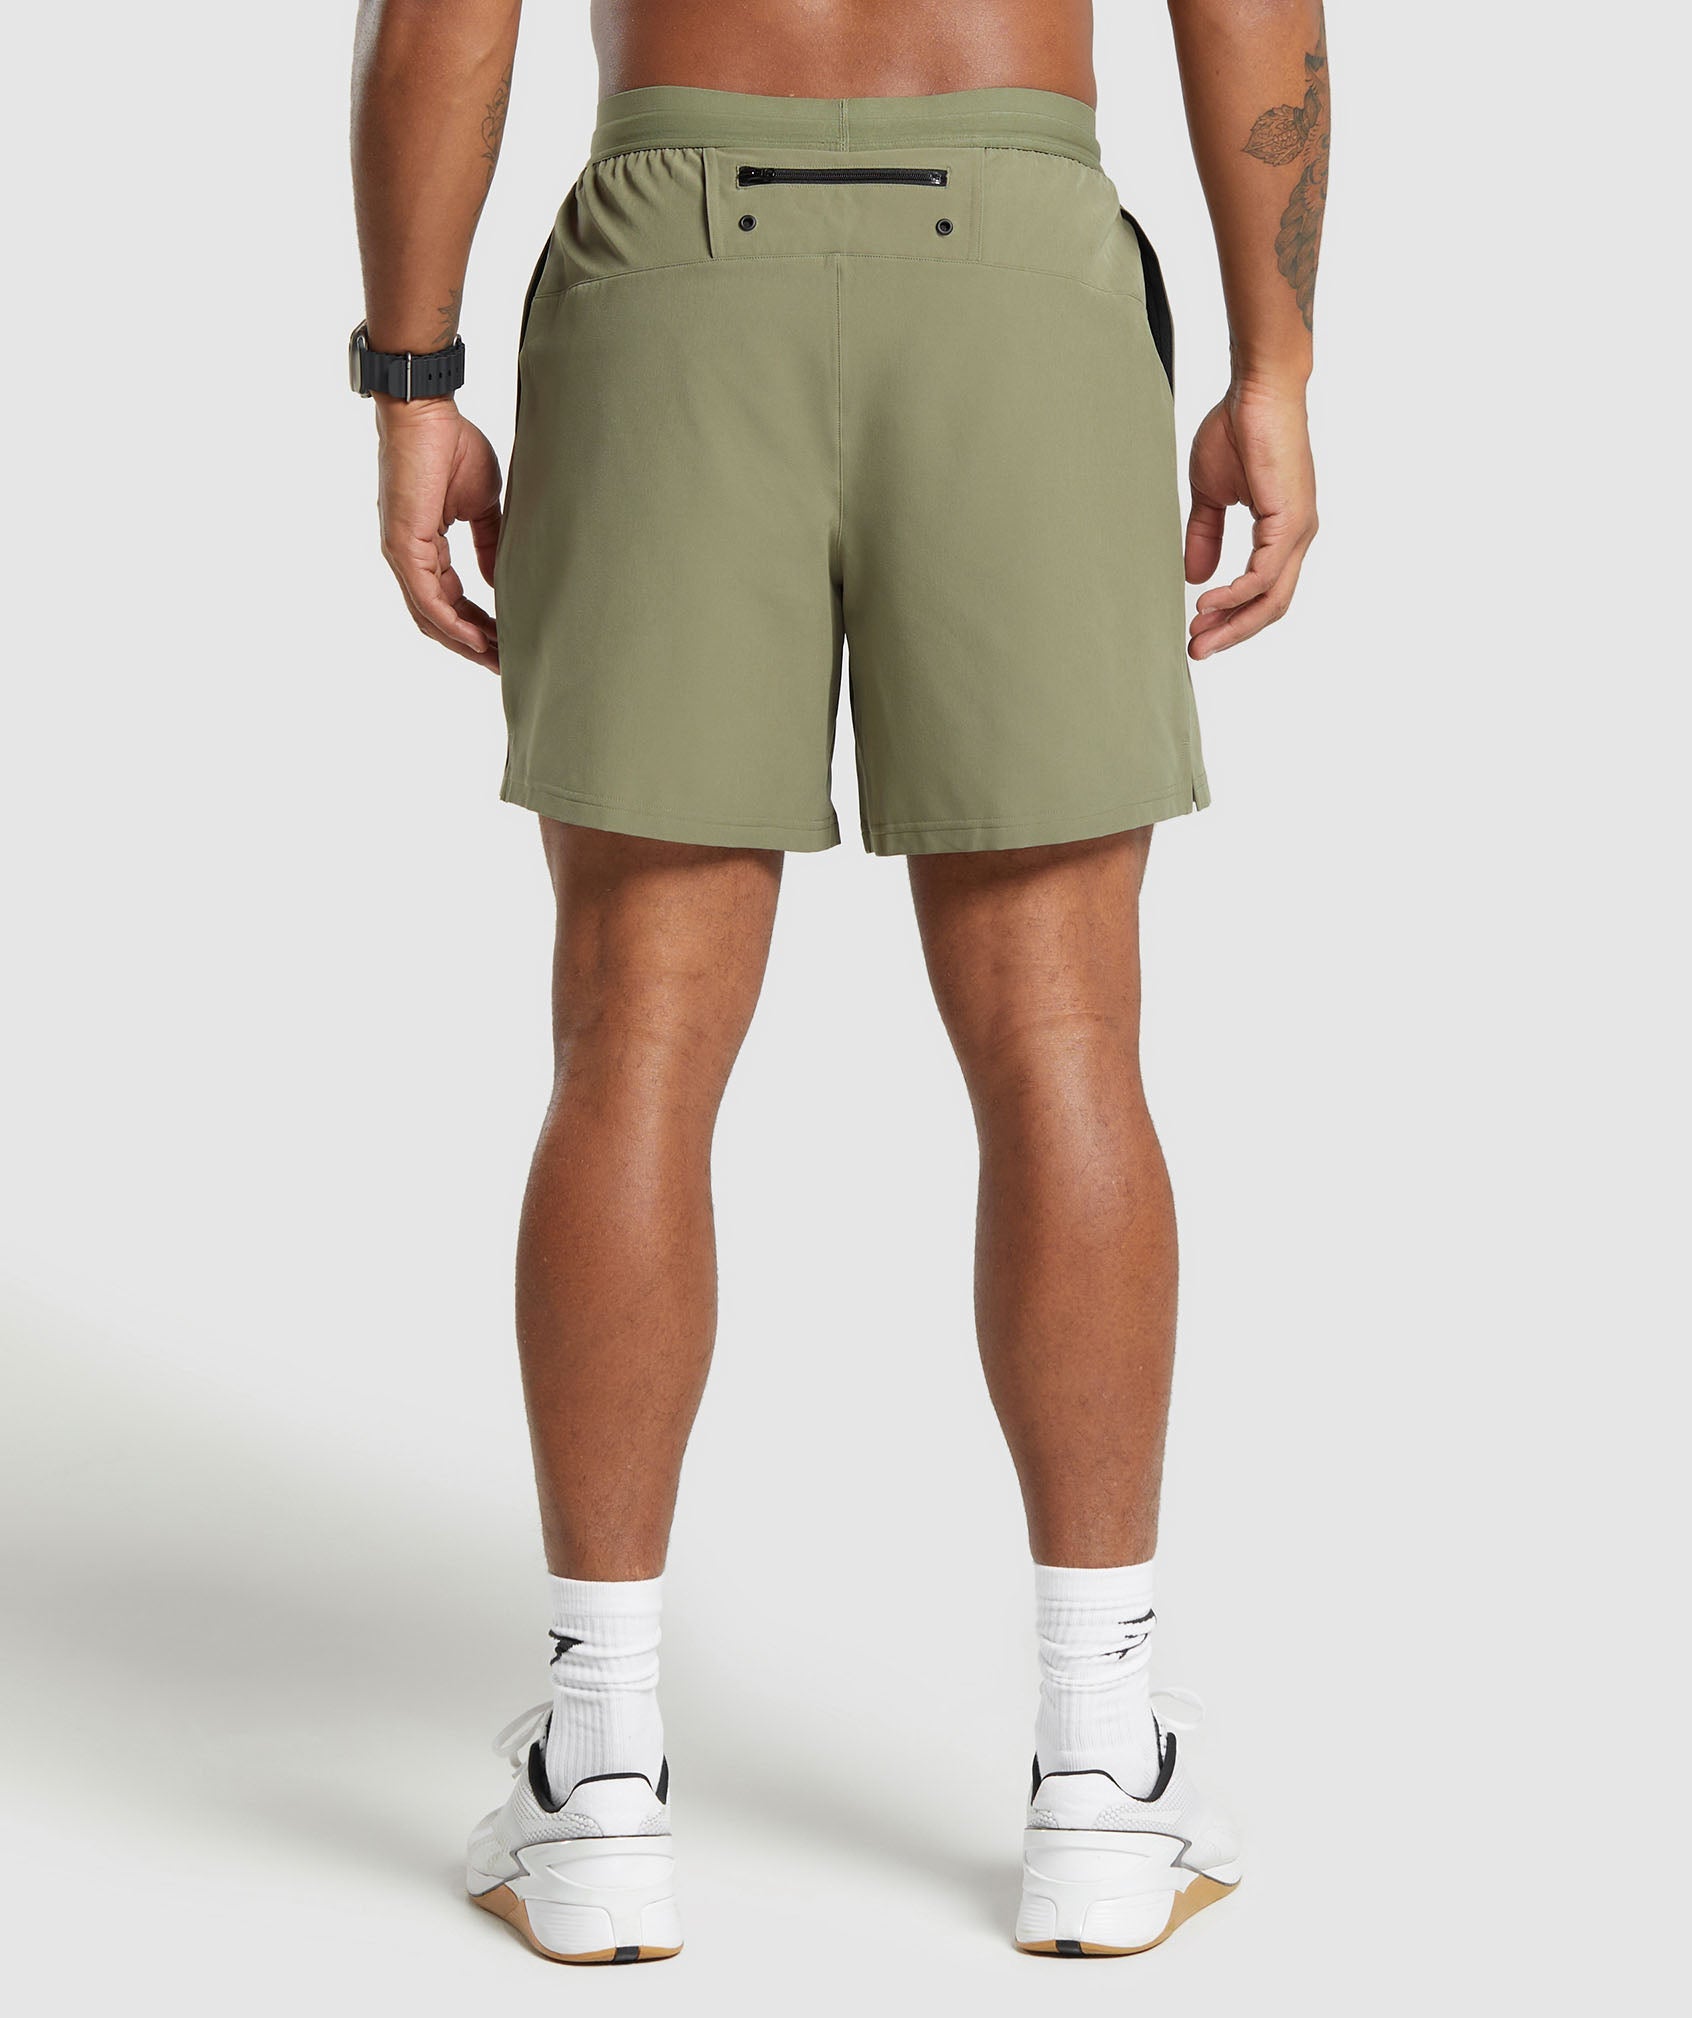 Land to Water 6" Shorts in Utility Green - view 2